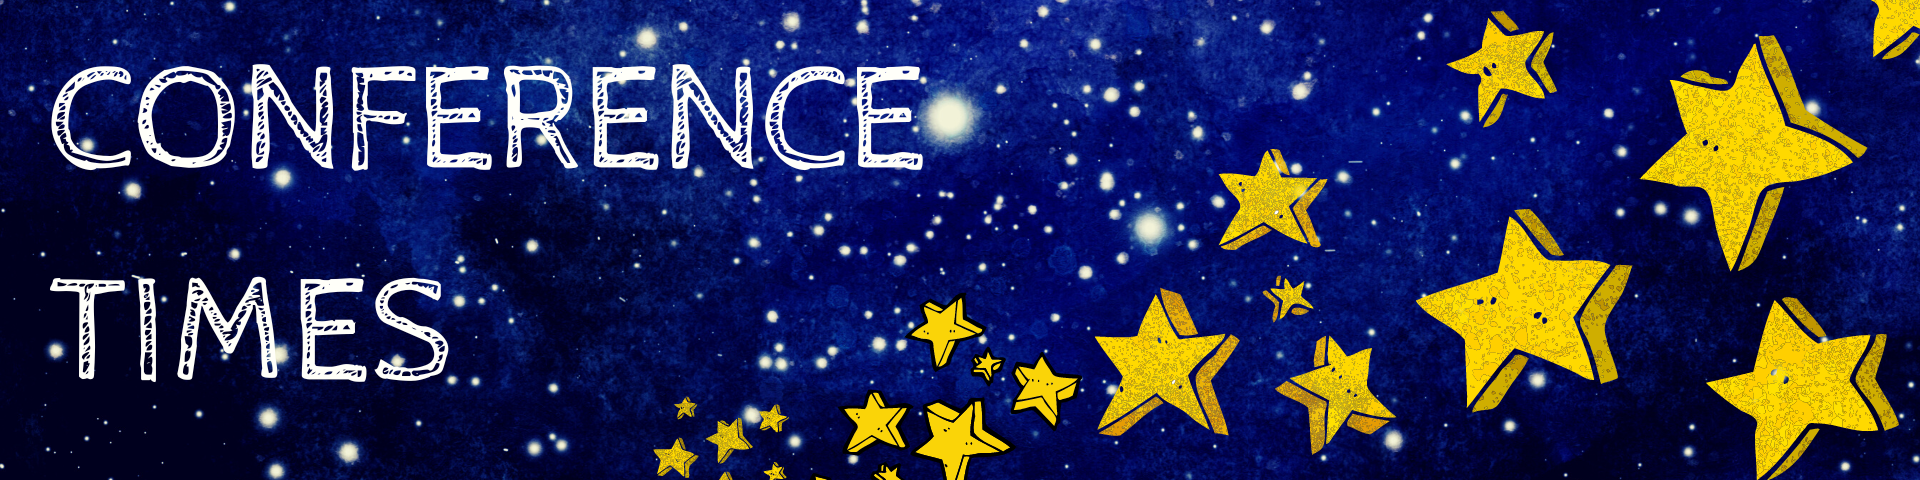 conference times banner with stars